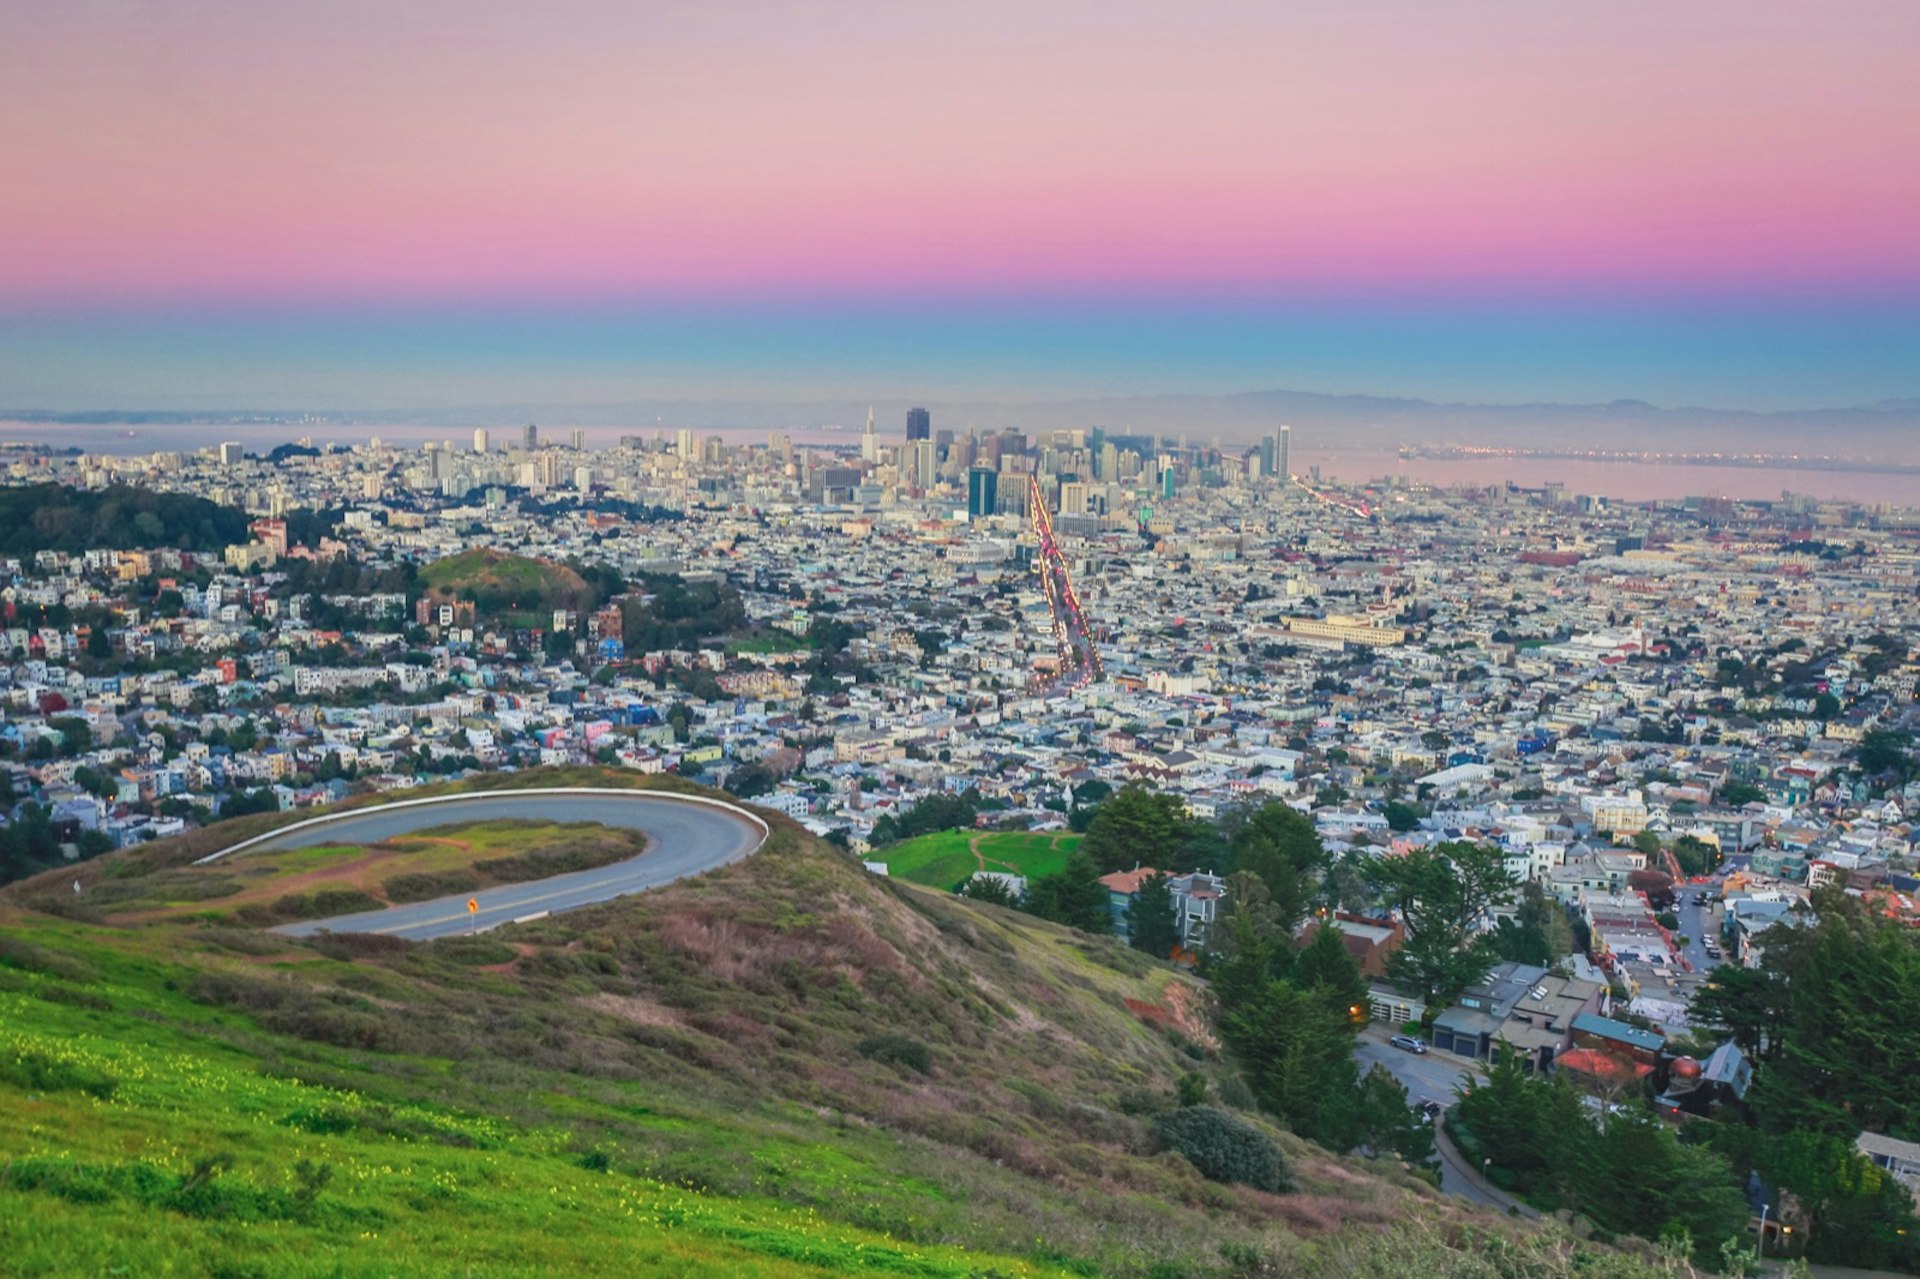 A view of the sunset from Twin Peaks